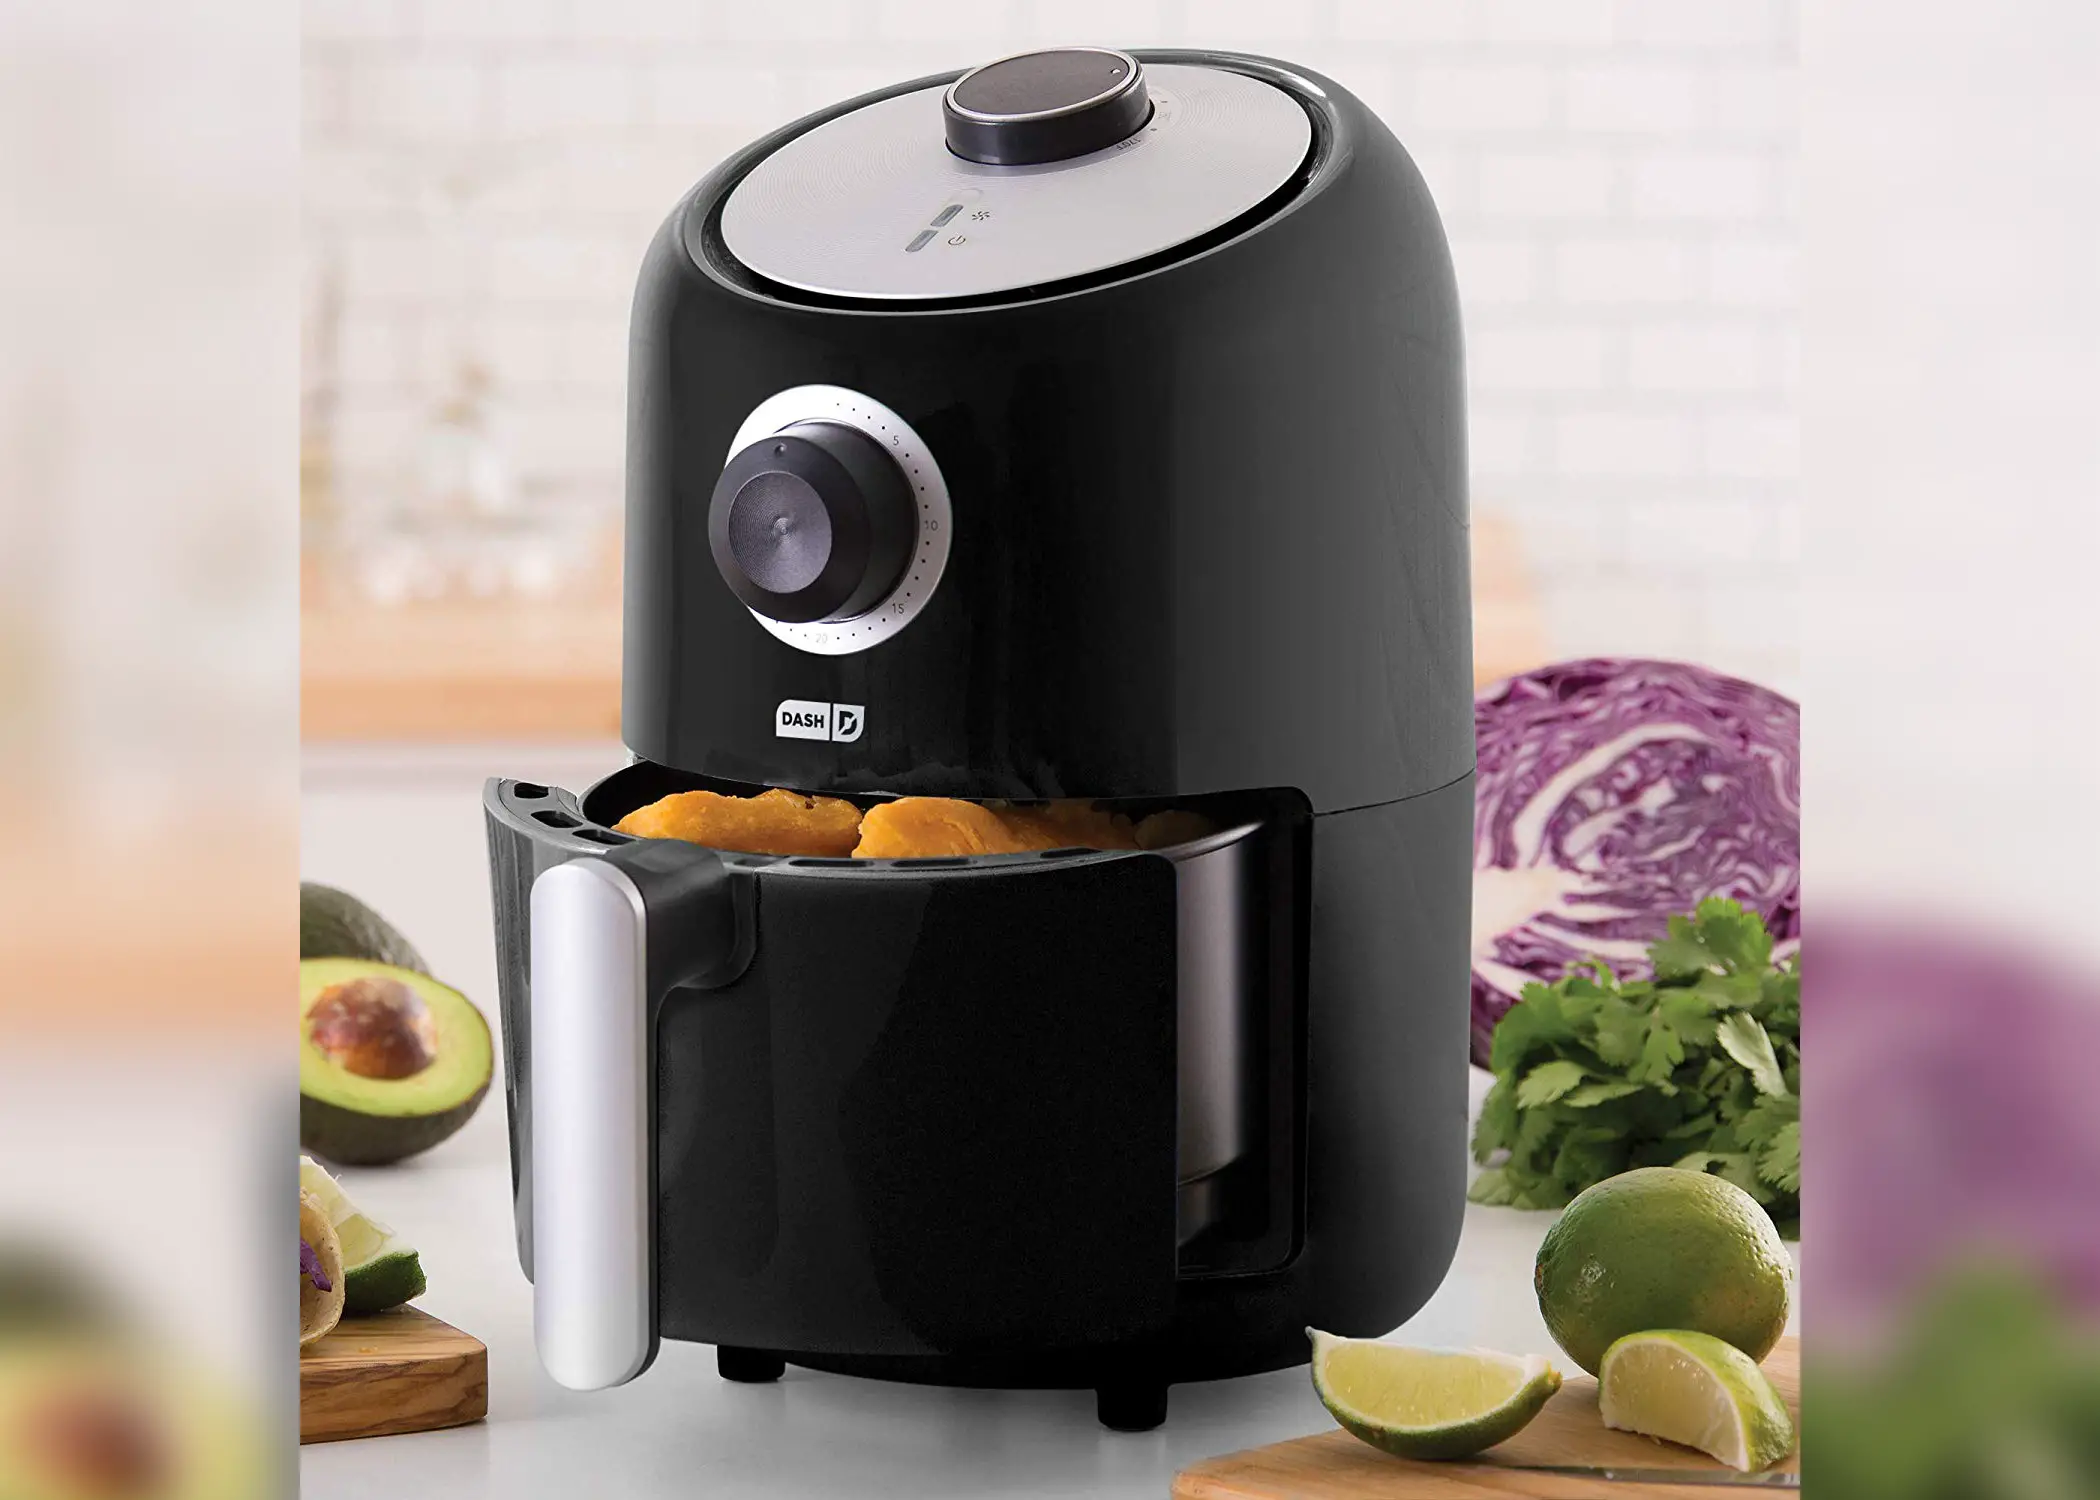 Black Friday came early for this $40 air fryer â BGR